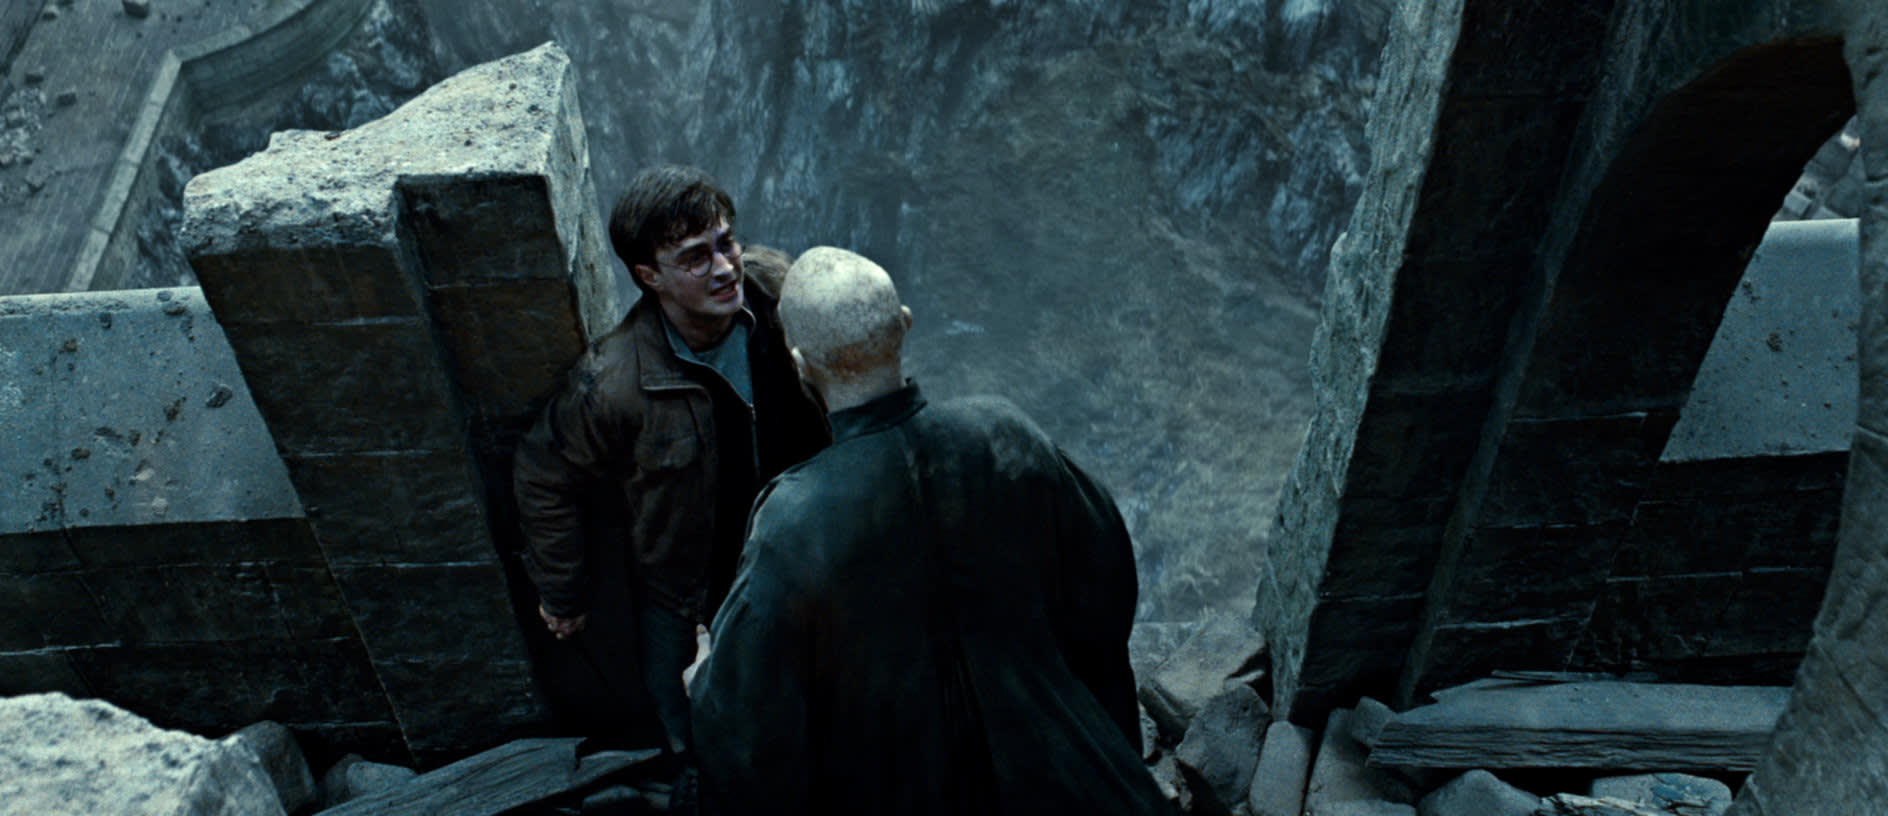 Voldemort and Harry at the edge of tallest tower in Hogwarts from the Deathly Hallows Part 2 